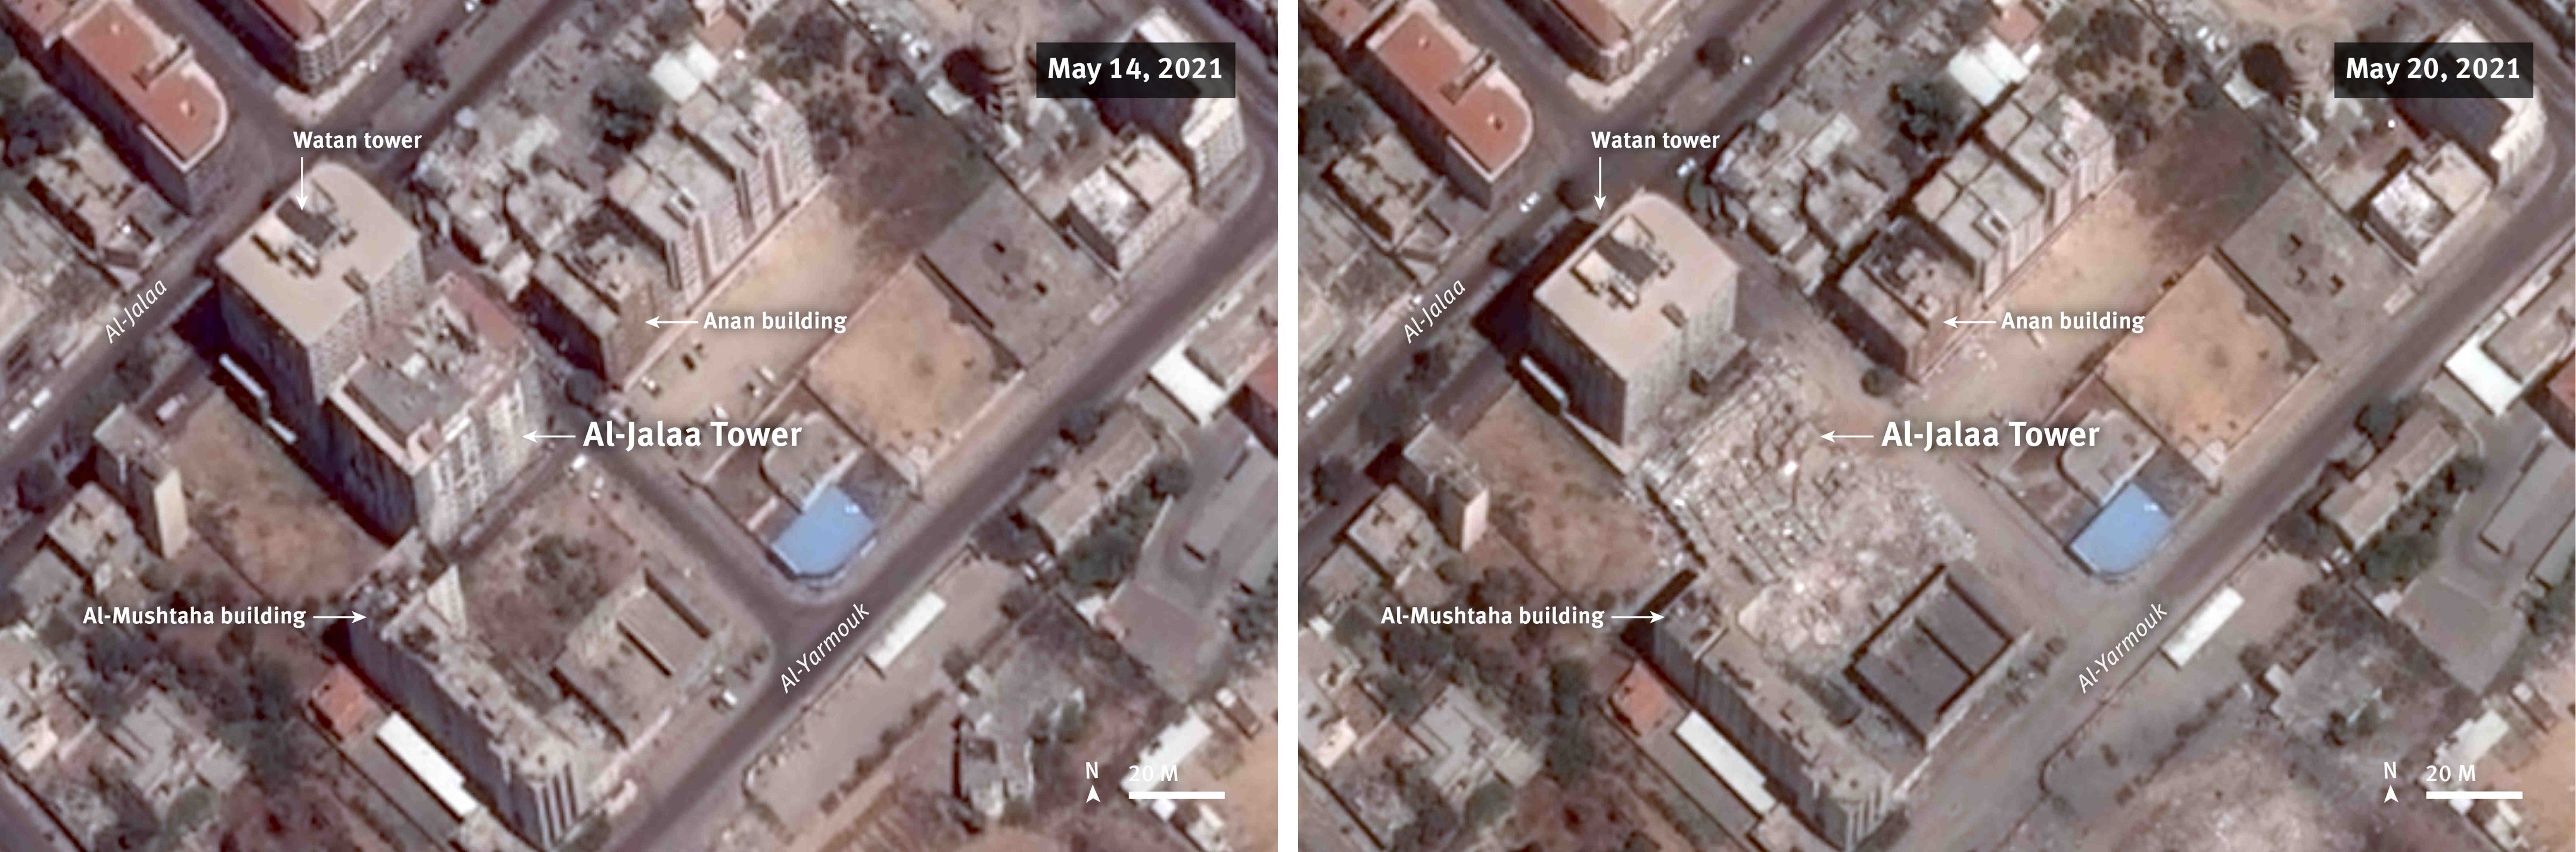 Before and after satellite imagery illustrate the attack and the associated damage to al-Jalaa tower that completely collapsed on May 15, 2021. 